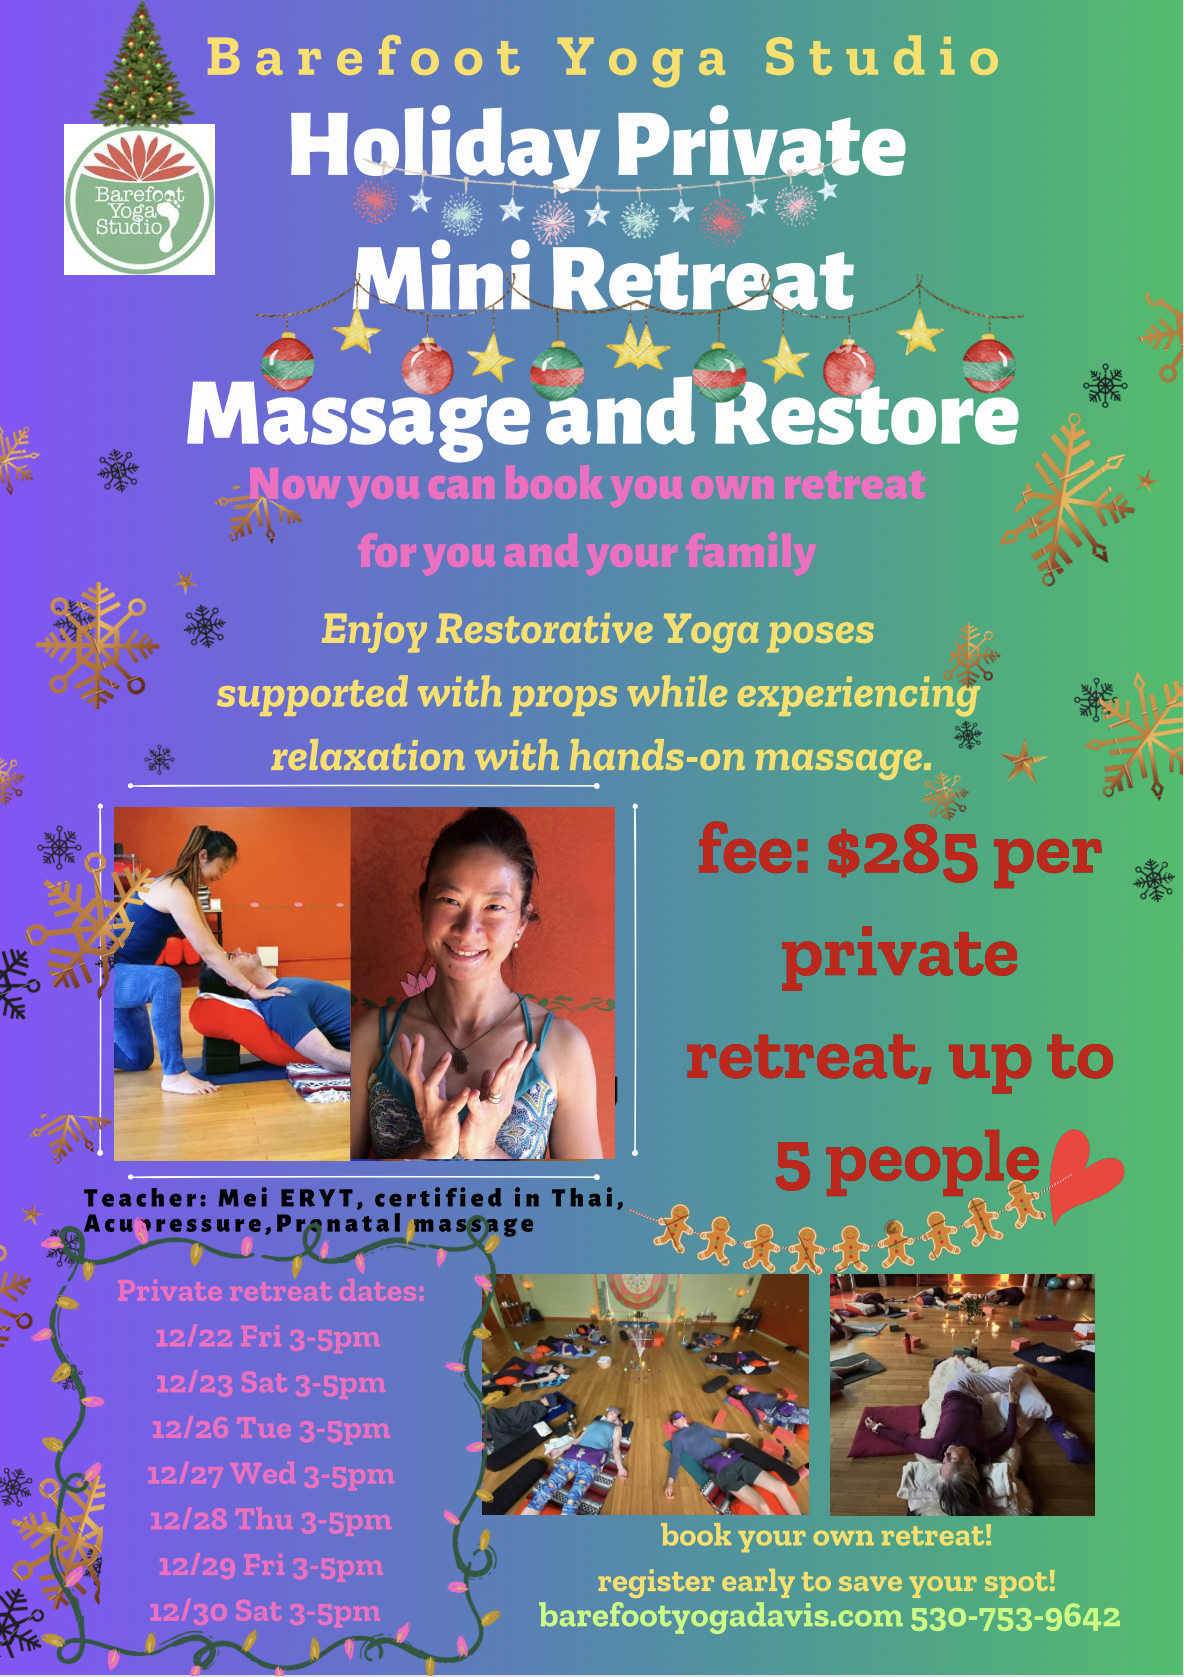 Holiday Private Mini-Retreat to Restore and Relax!